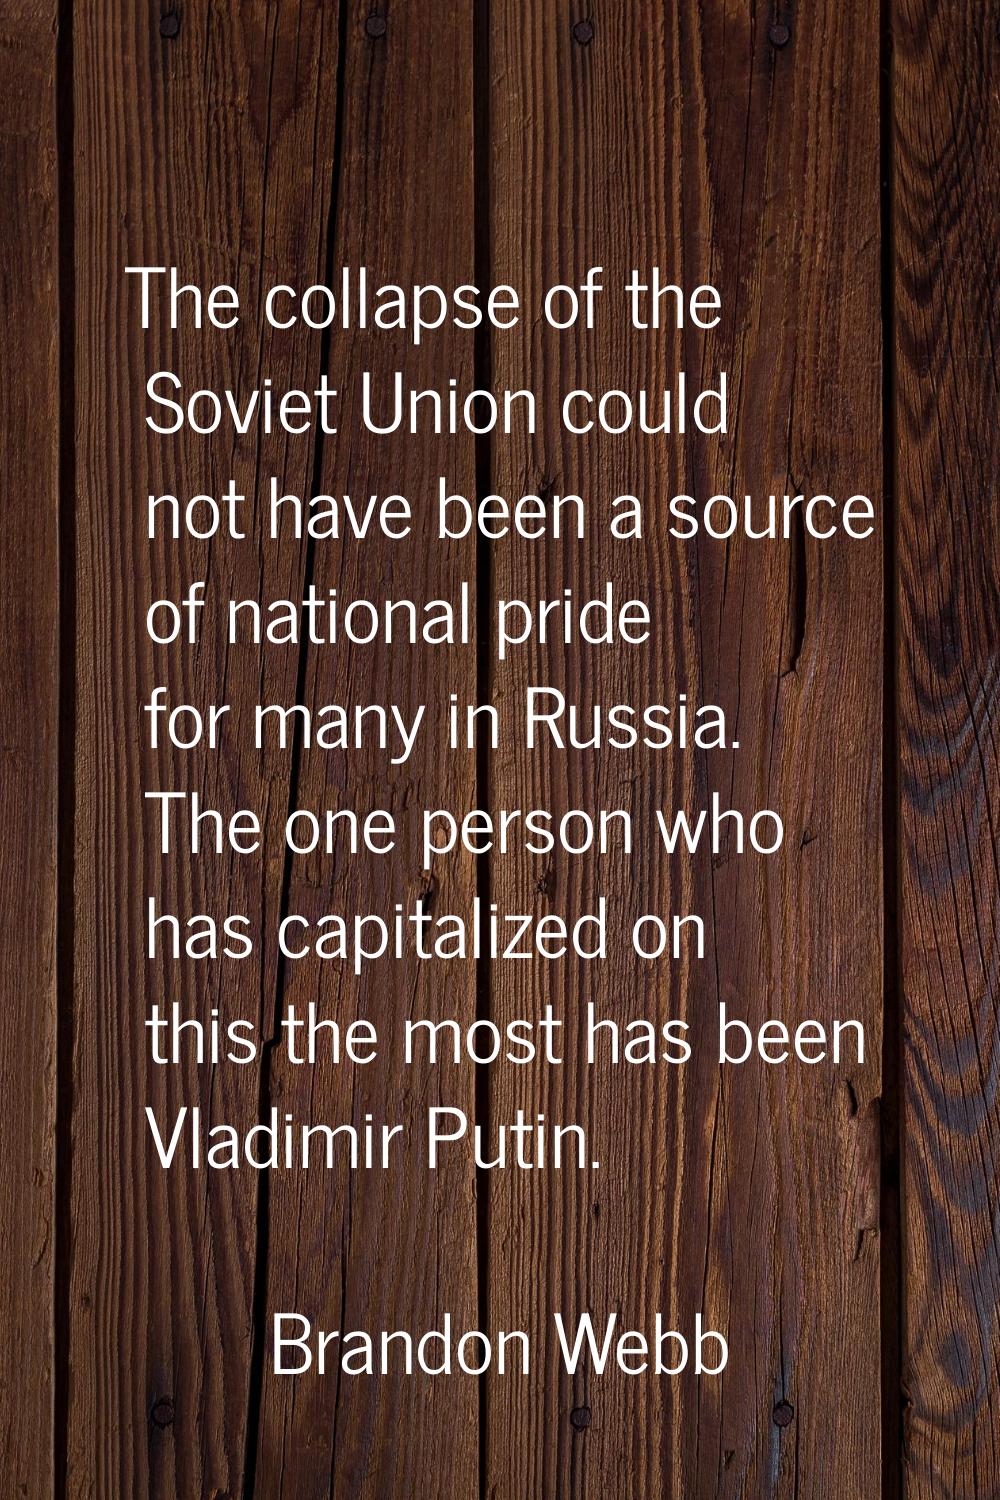 The collapse of the Soviet Union could not have been a source of national pride for many in Russia.